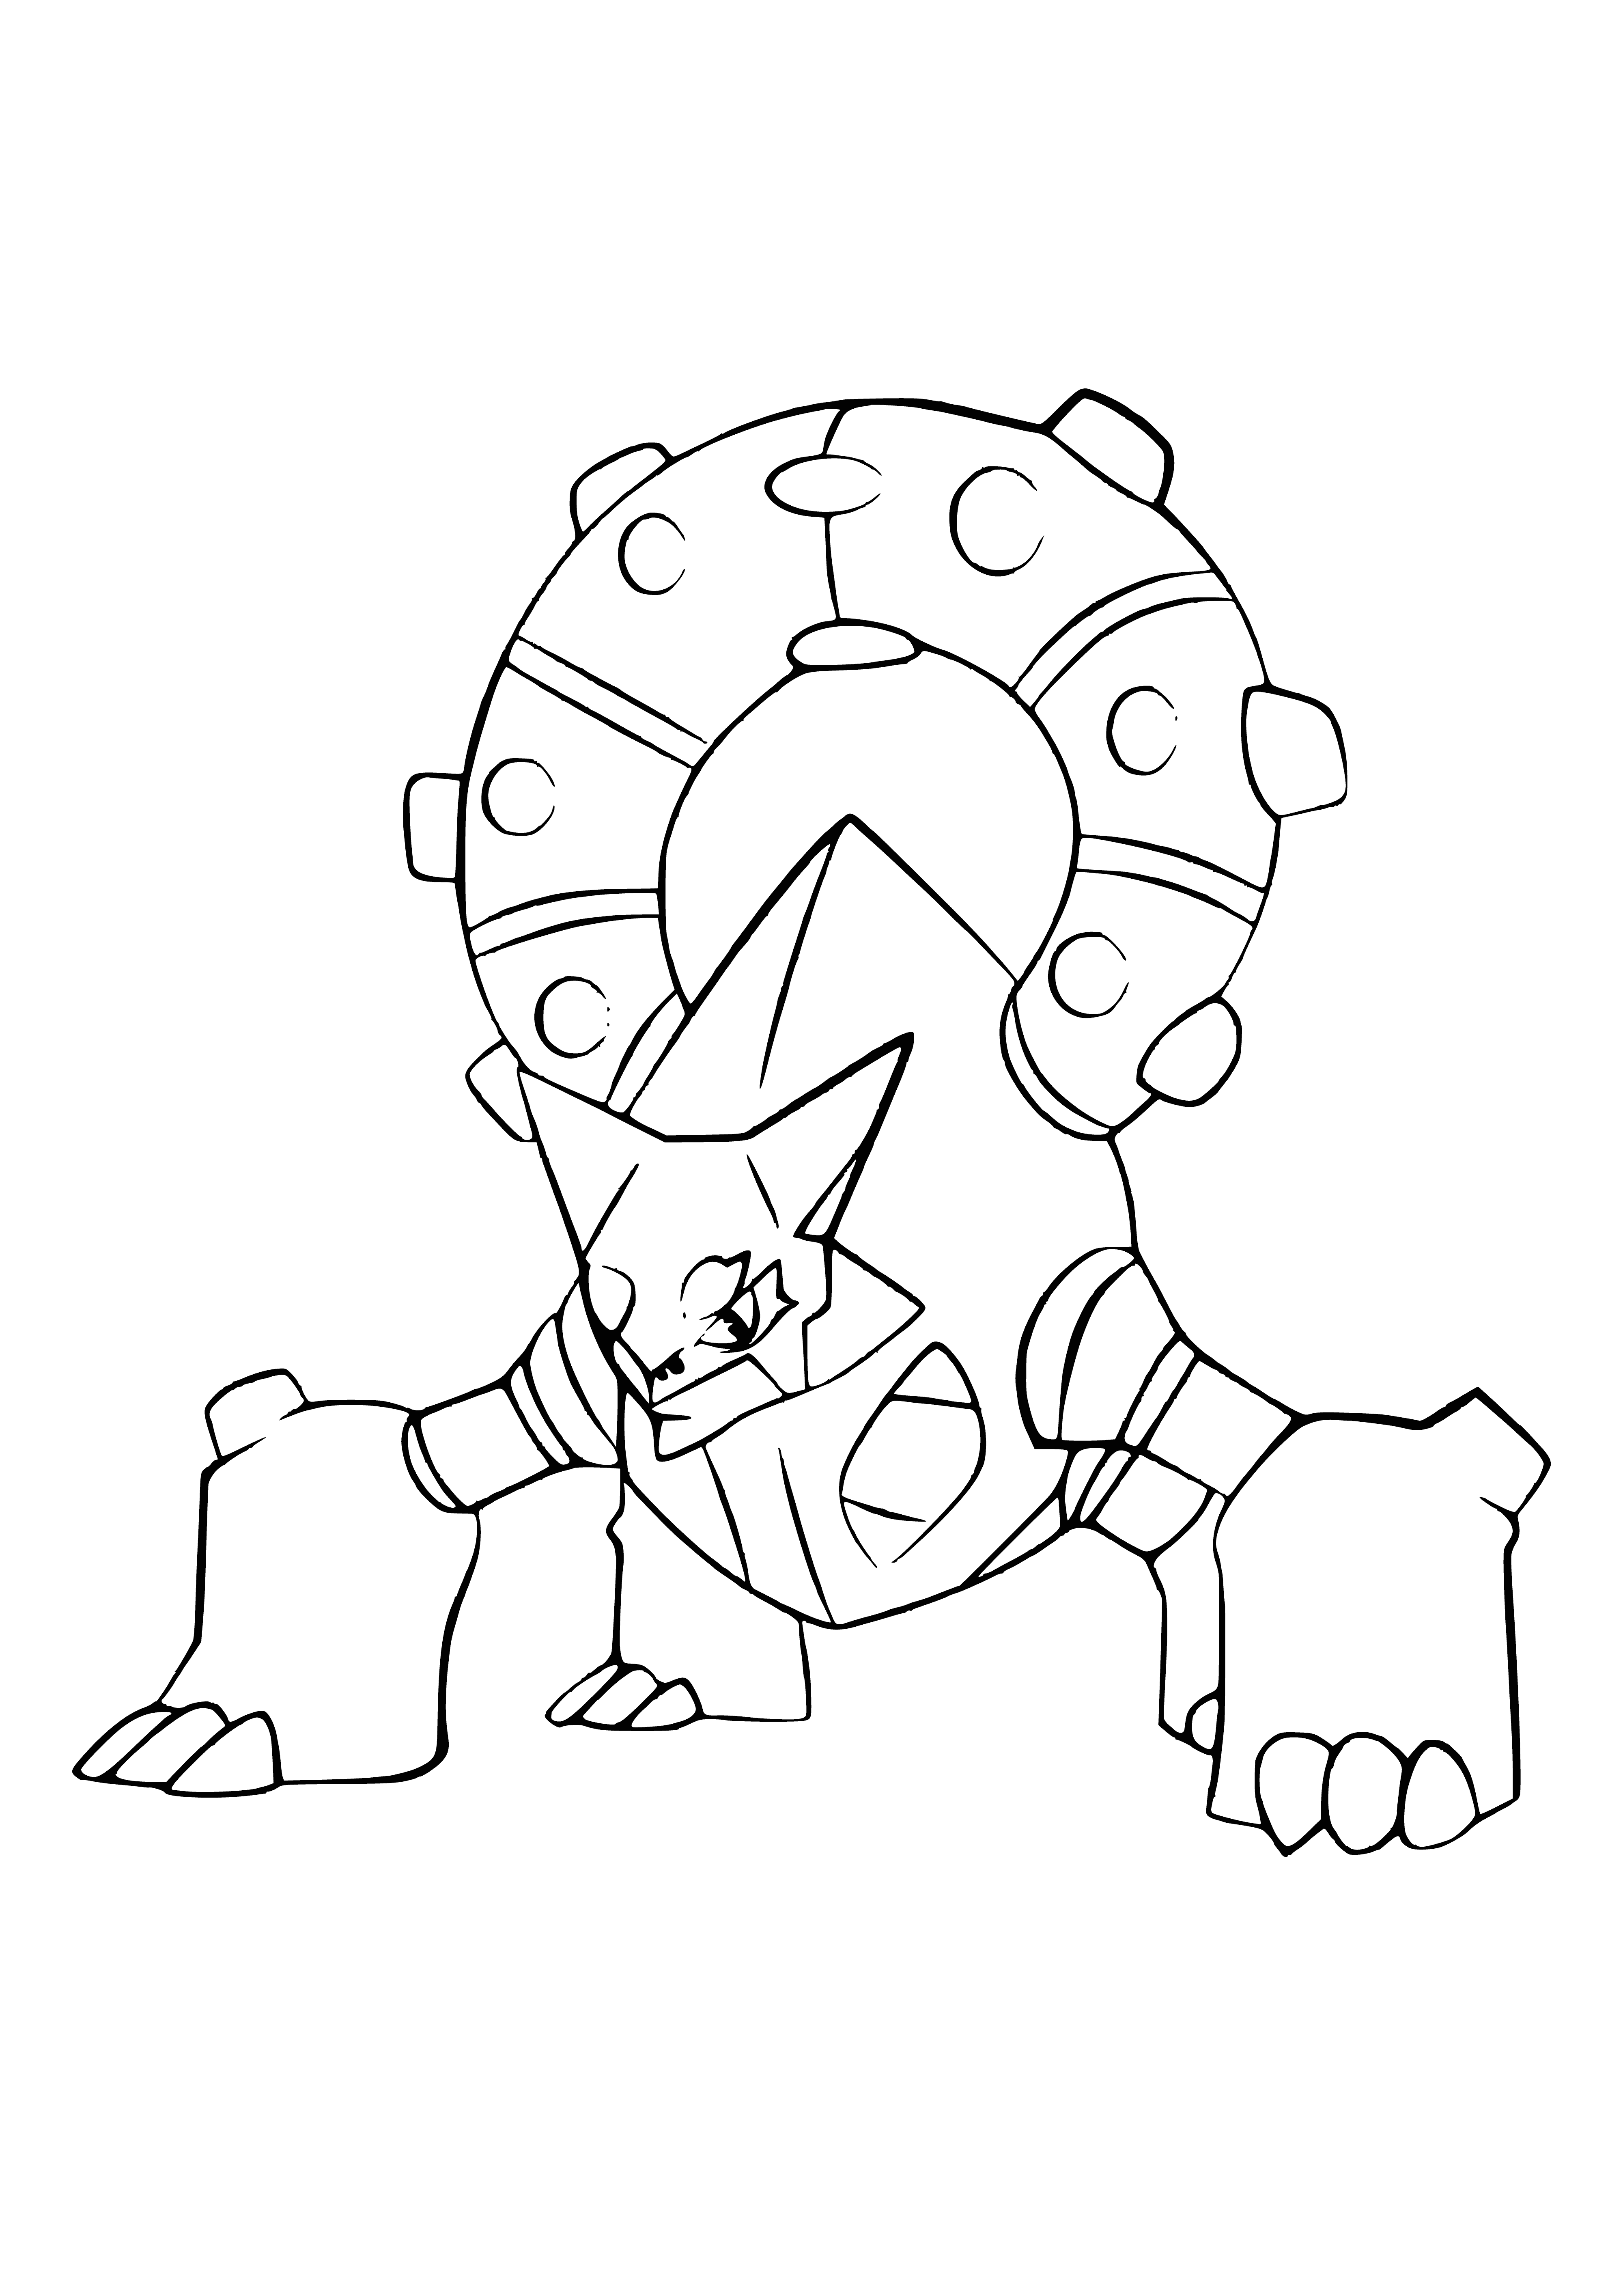 Legendary Pokemon Volcanion coloring page